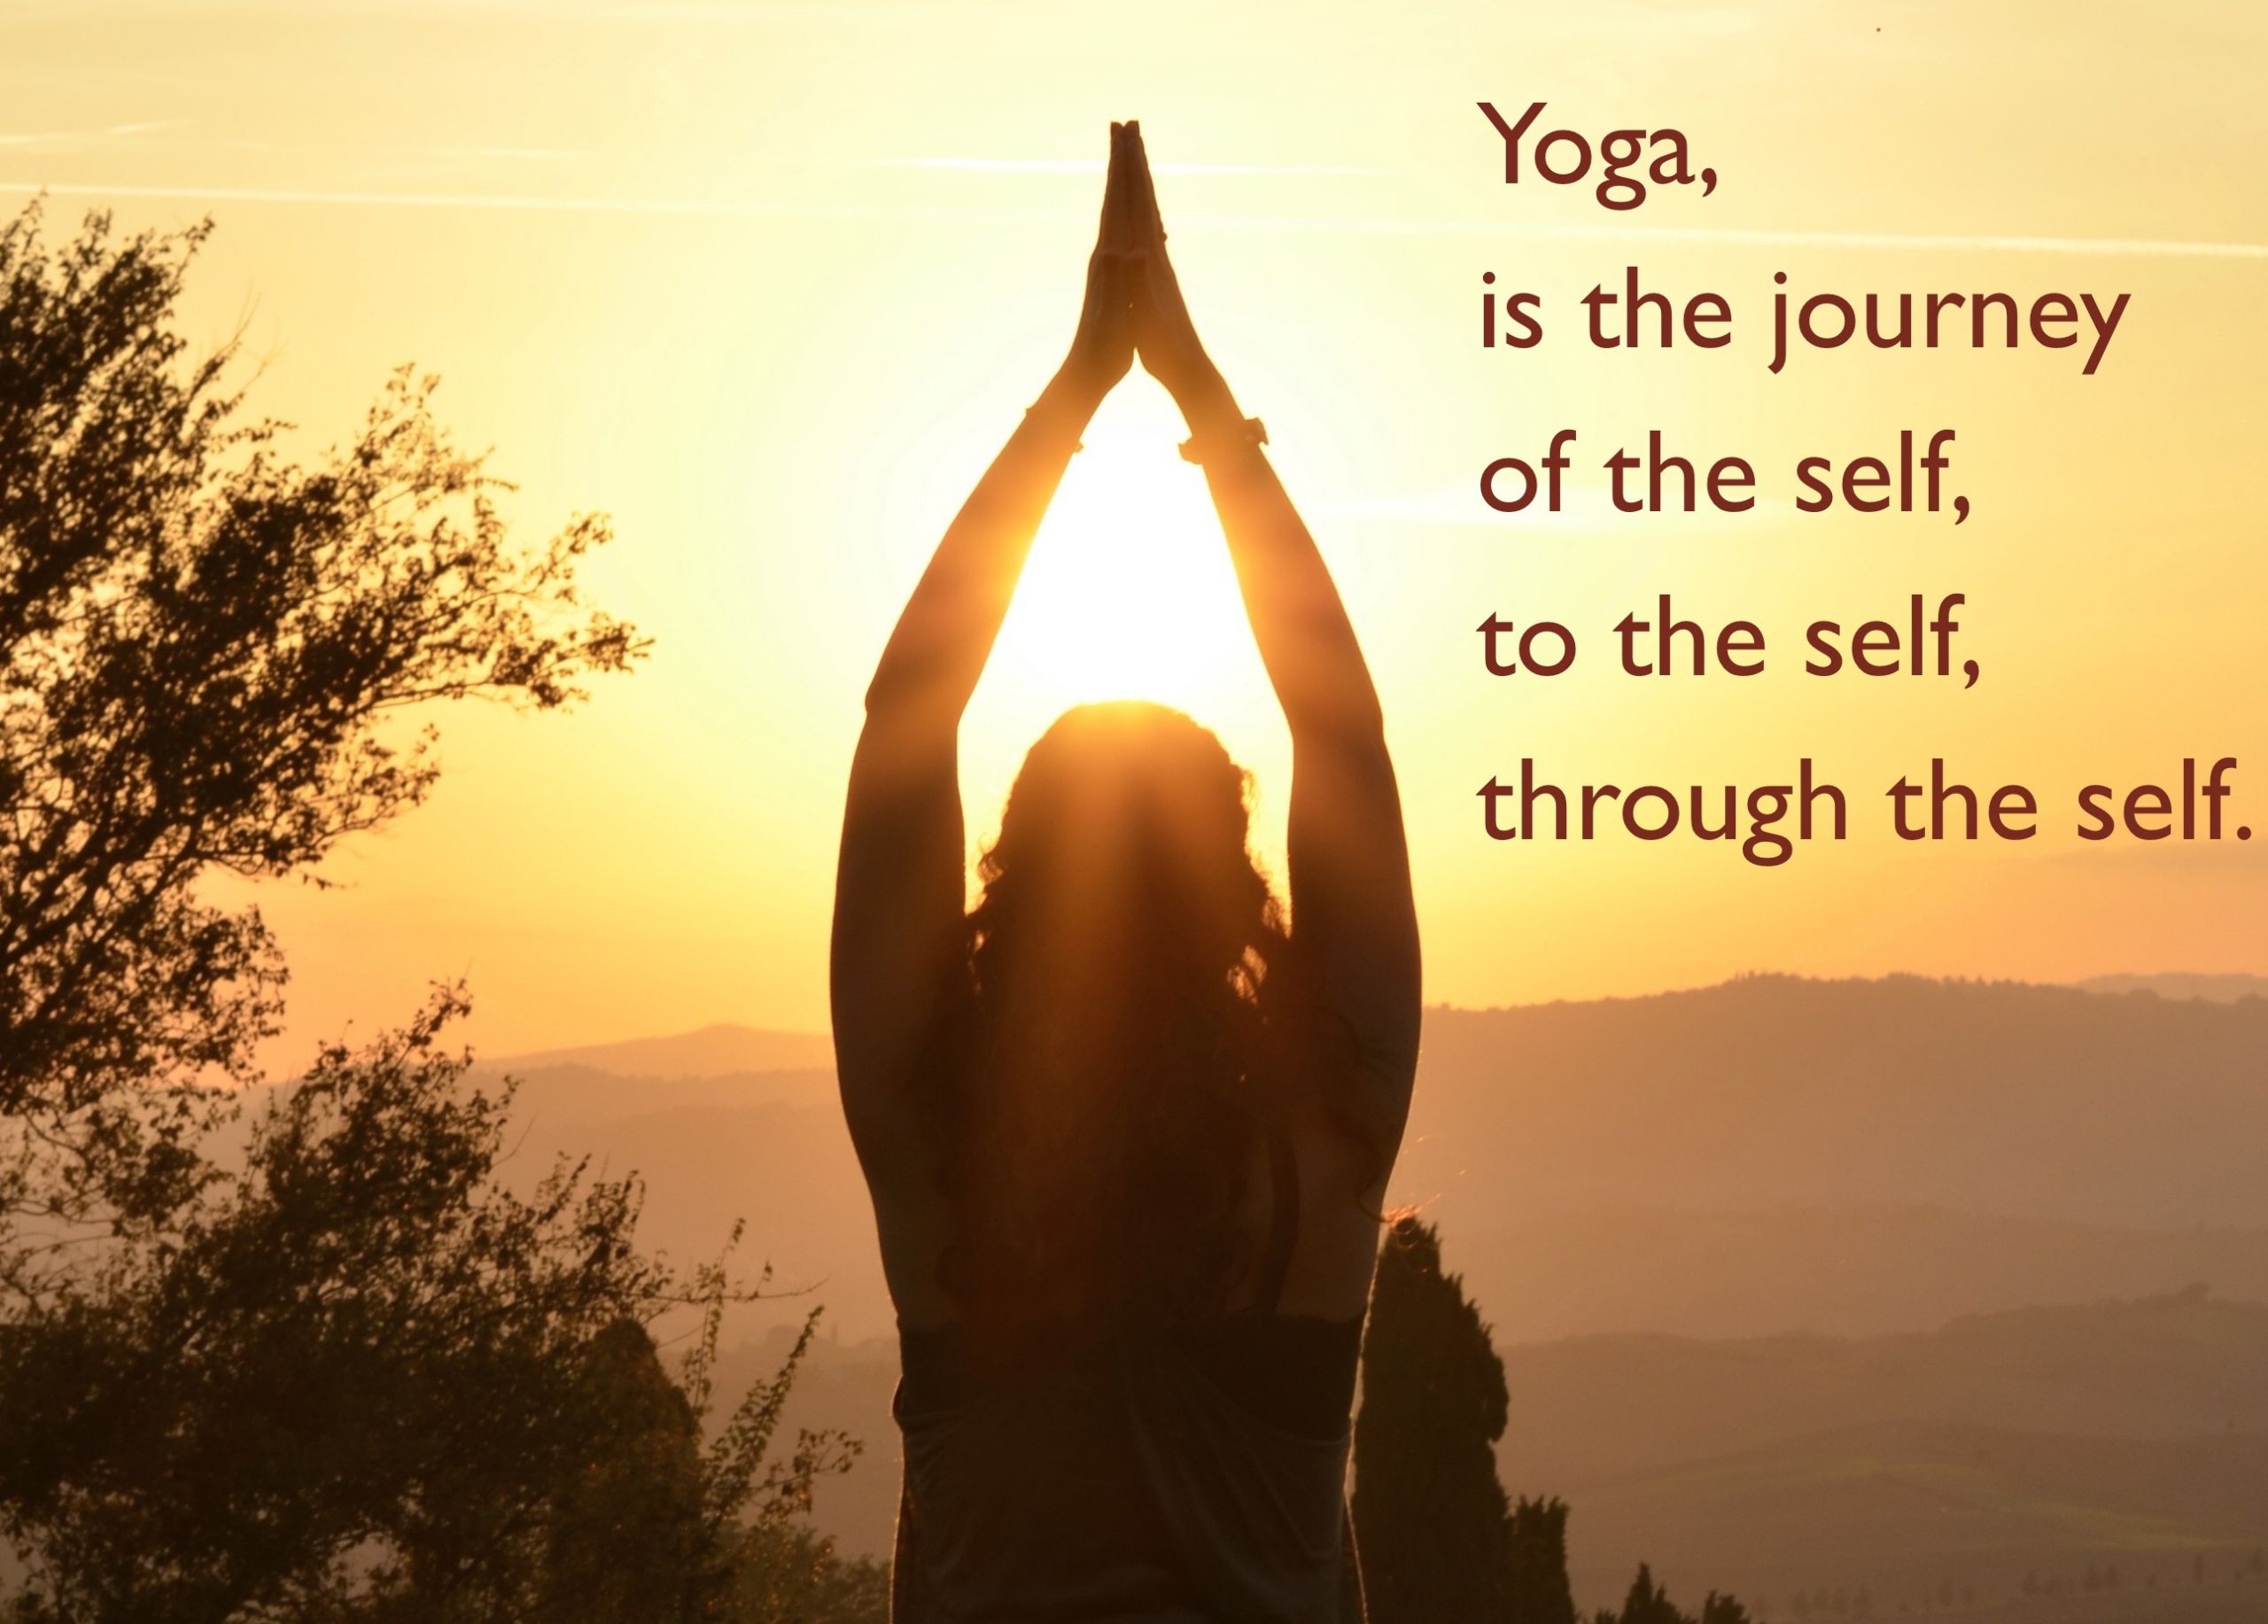 Yoga Quotes About Life
 Quotes on Yoga & Life